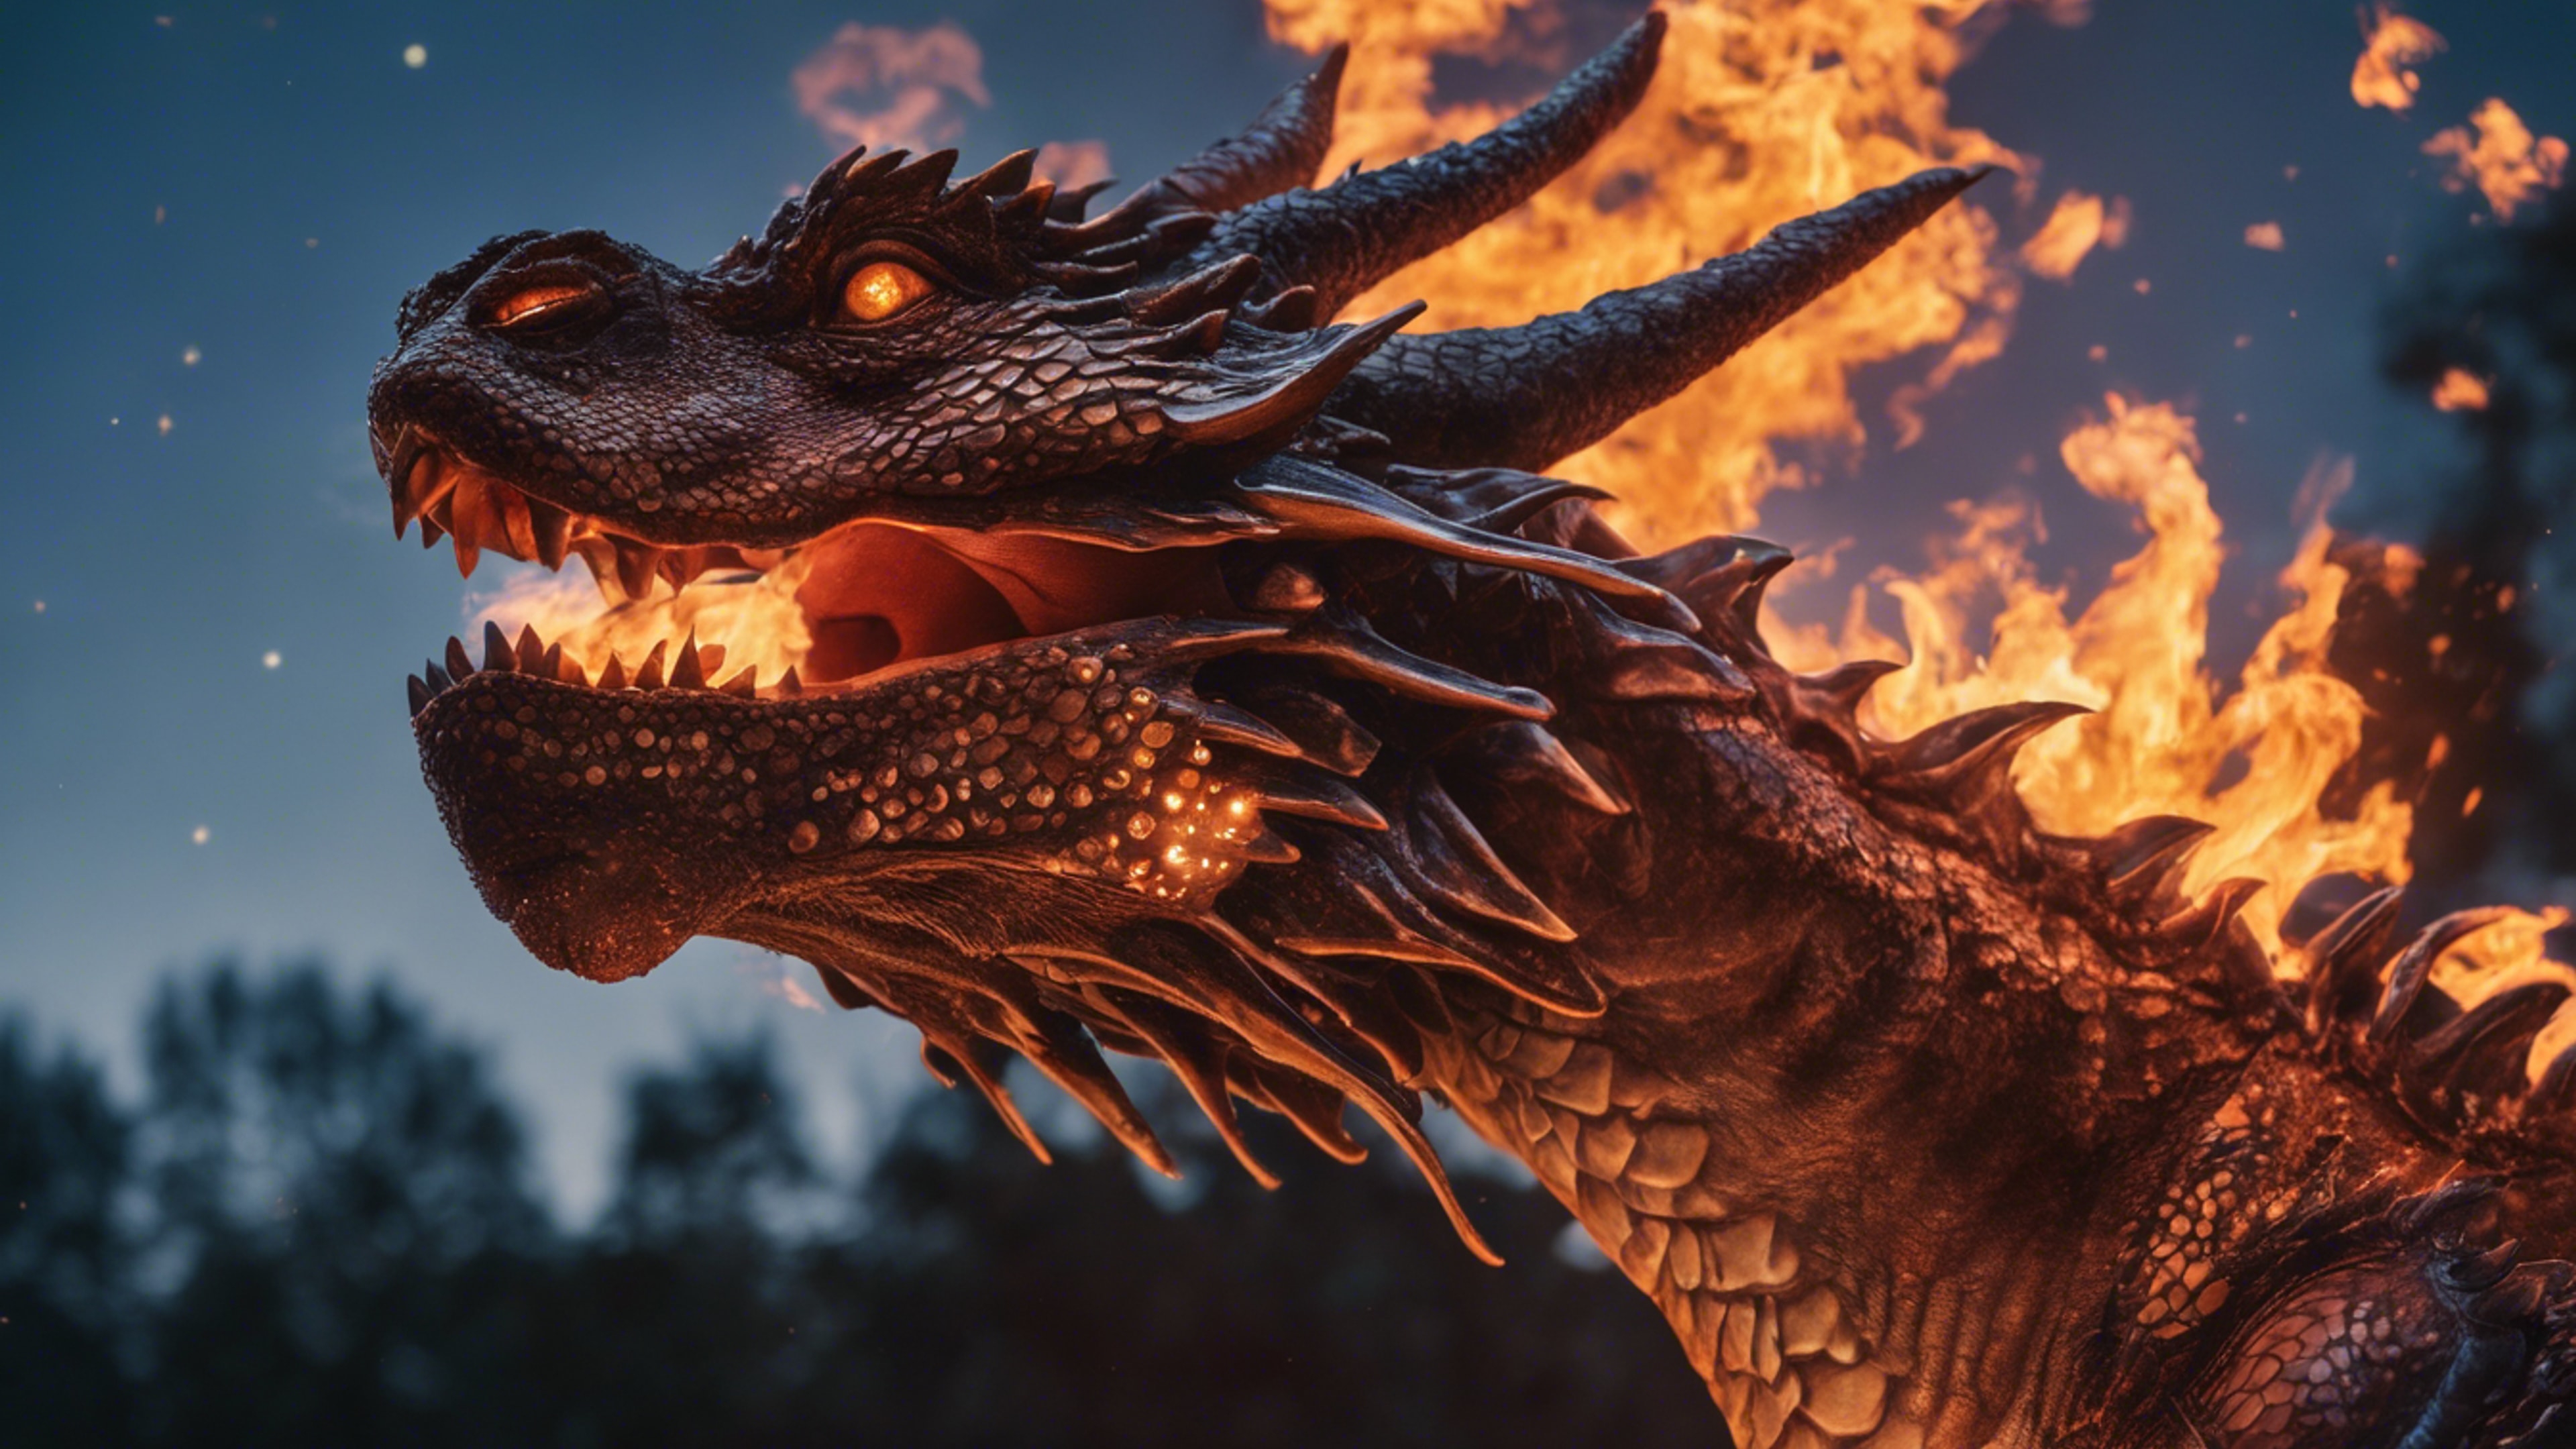 A fire-breathing dragon surrounded by the glow of its own flames against a night sky.壁紙[8f1bf836869843a19451]